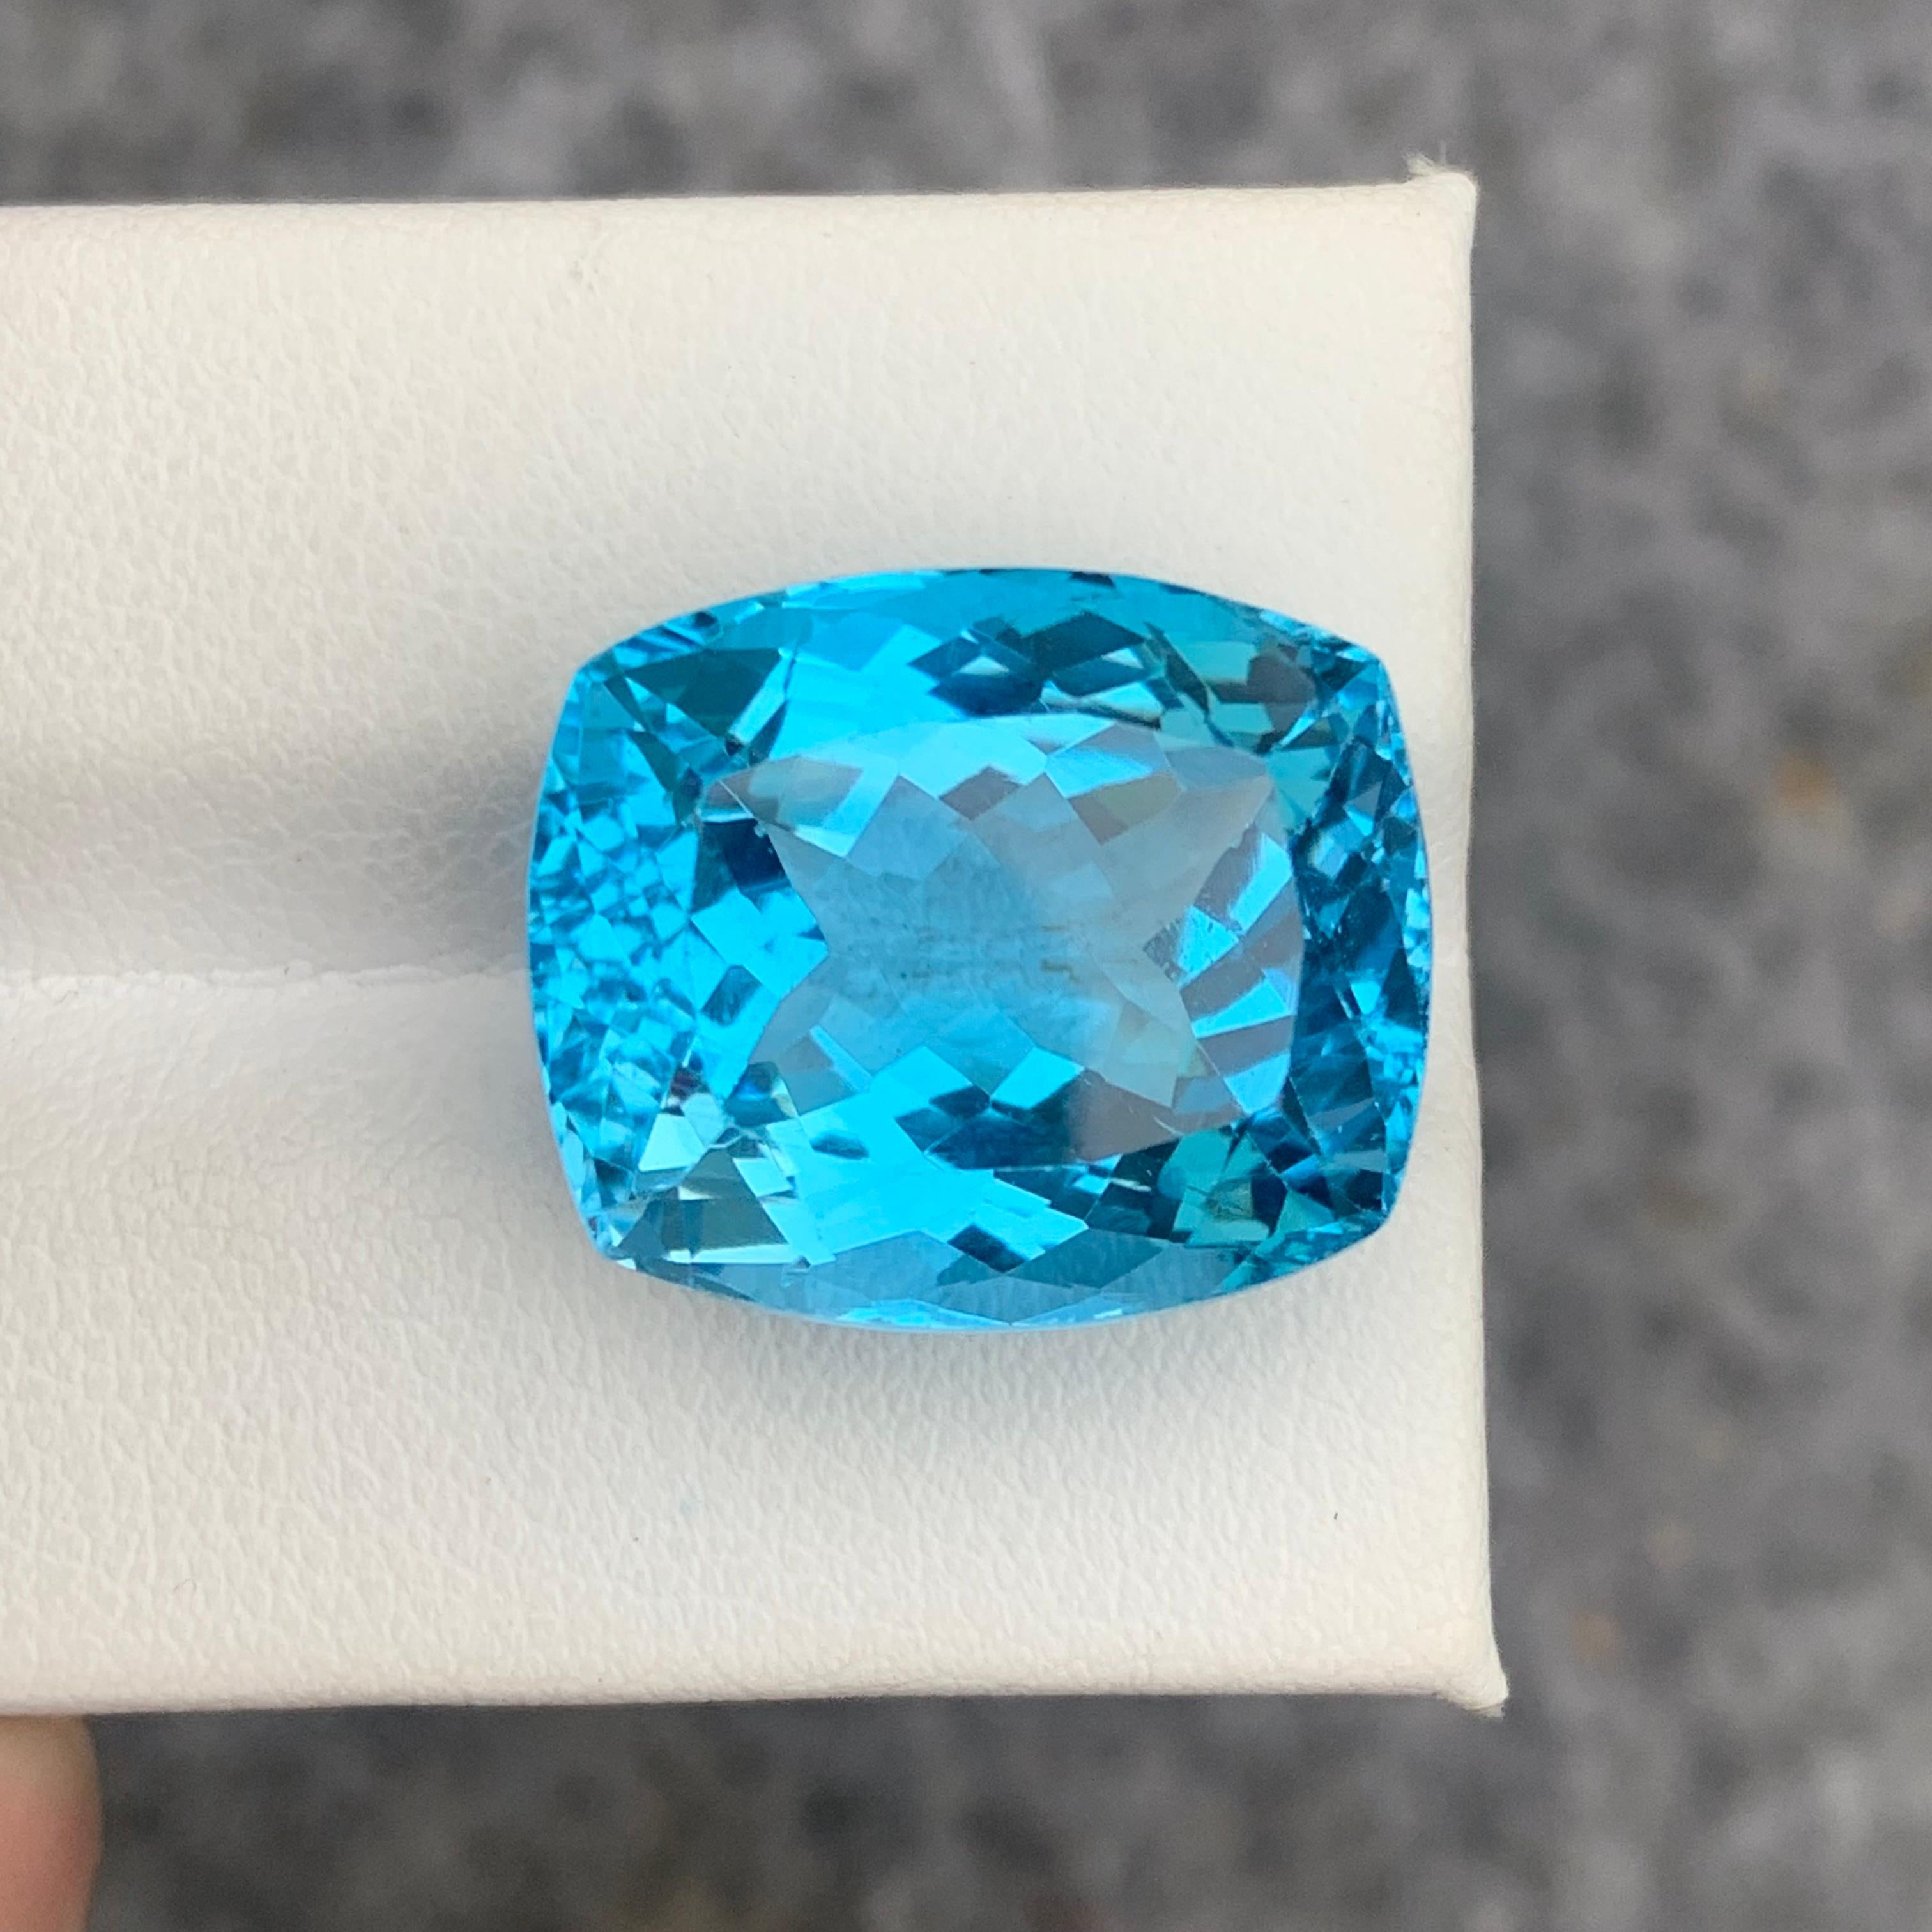 Gorgeous 31.10 Carat Loose Blue Topaz from Brazil Long Cushion Cut for Jewelry 7